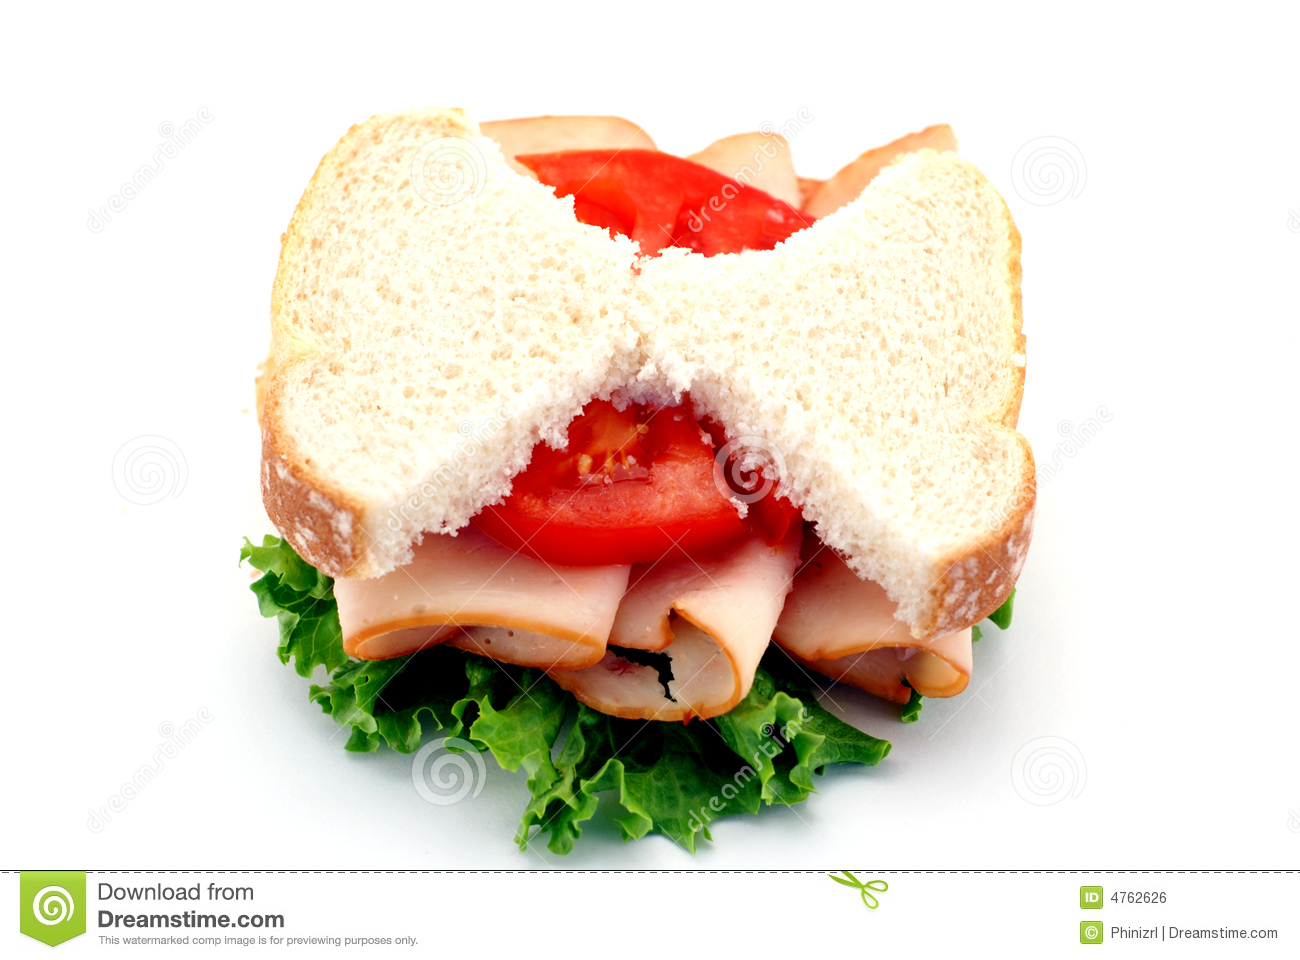 Low Carb Diet Concept With Skinny Bread Slices On A Turkey Sandwich    